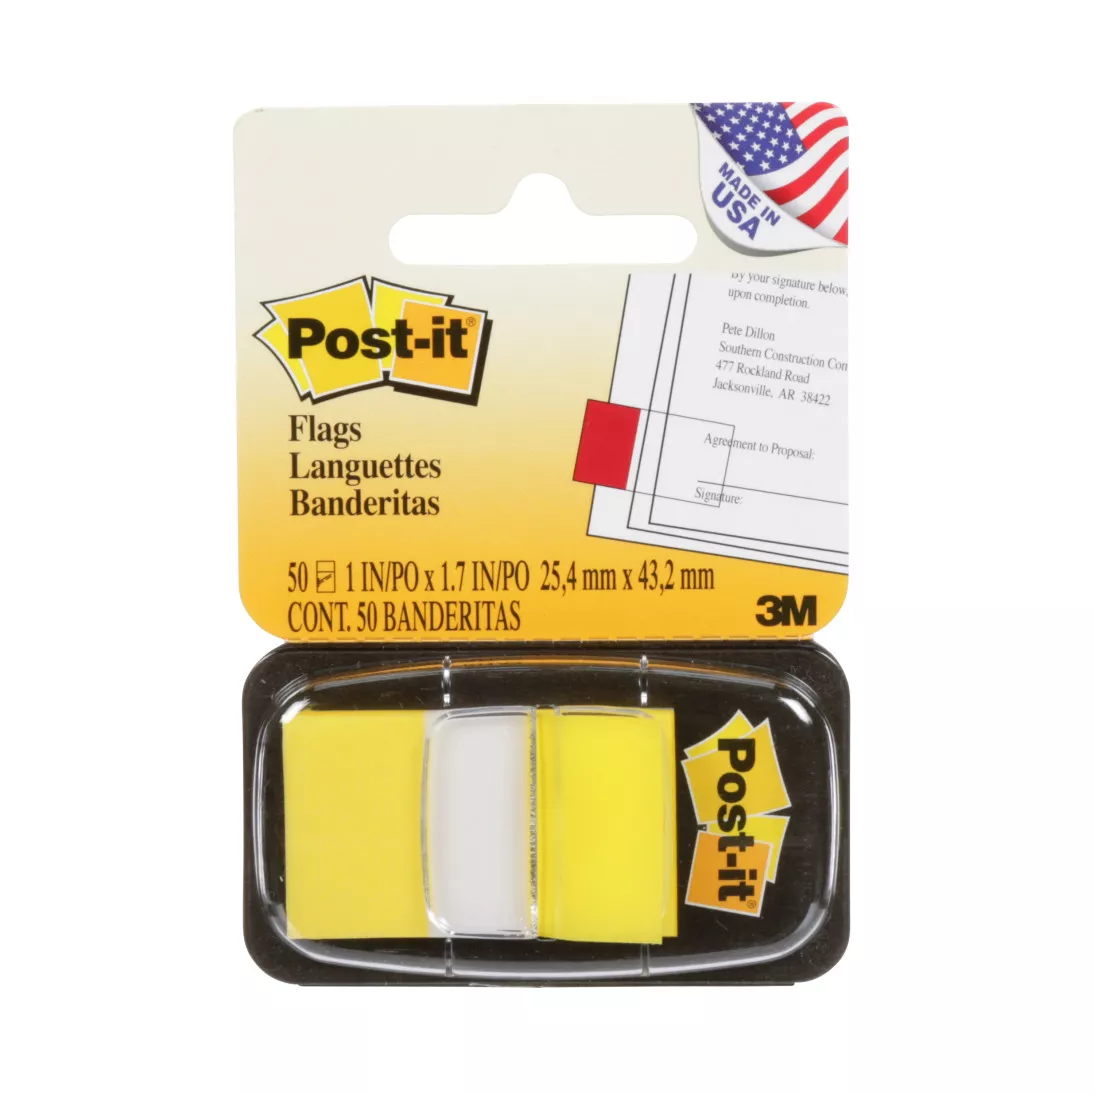 Post-it® Flags 680-5-24, 1 in. x 1.7 in. (25,4 mm x 43,2 mm) Canary
Yellow 24 dis/pk 2 pk/cs